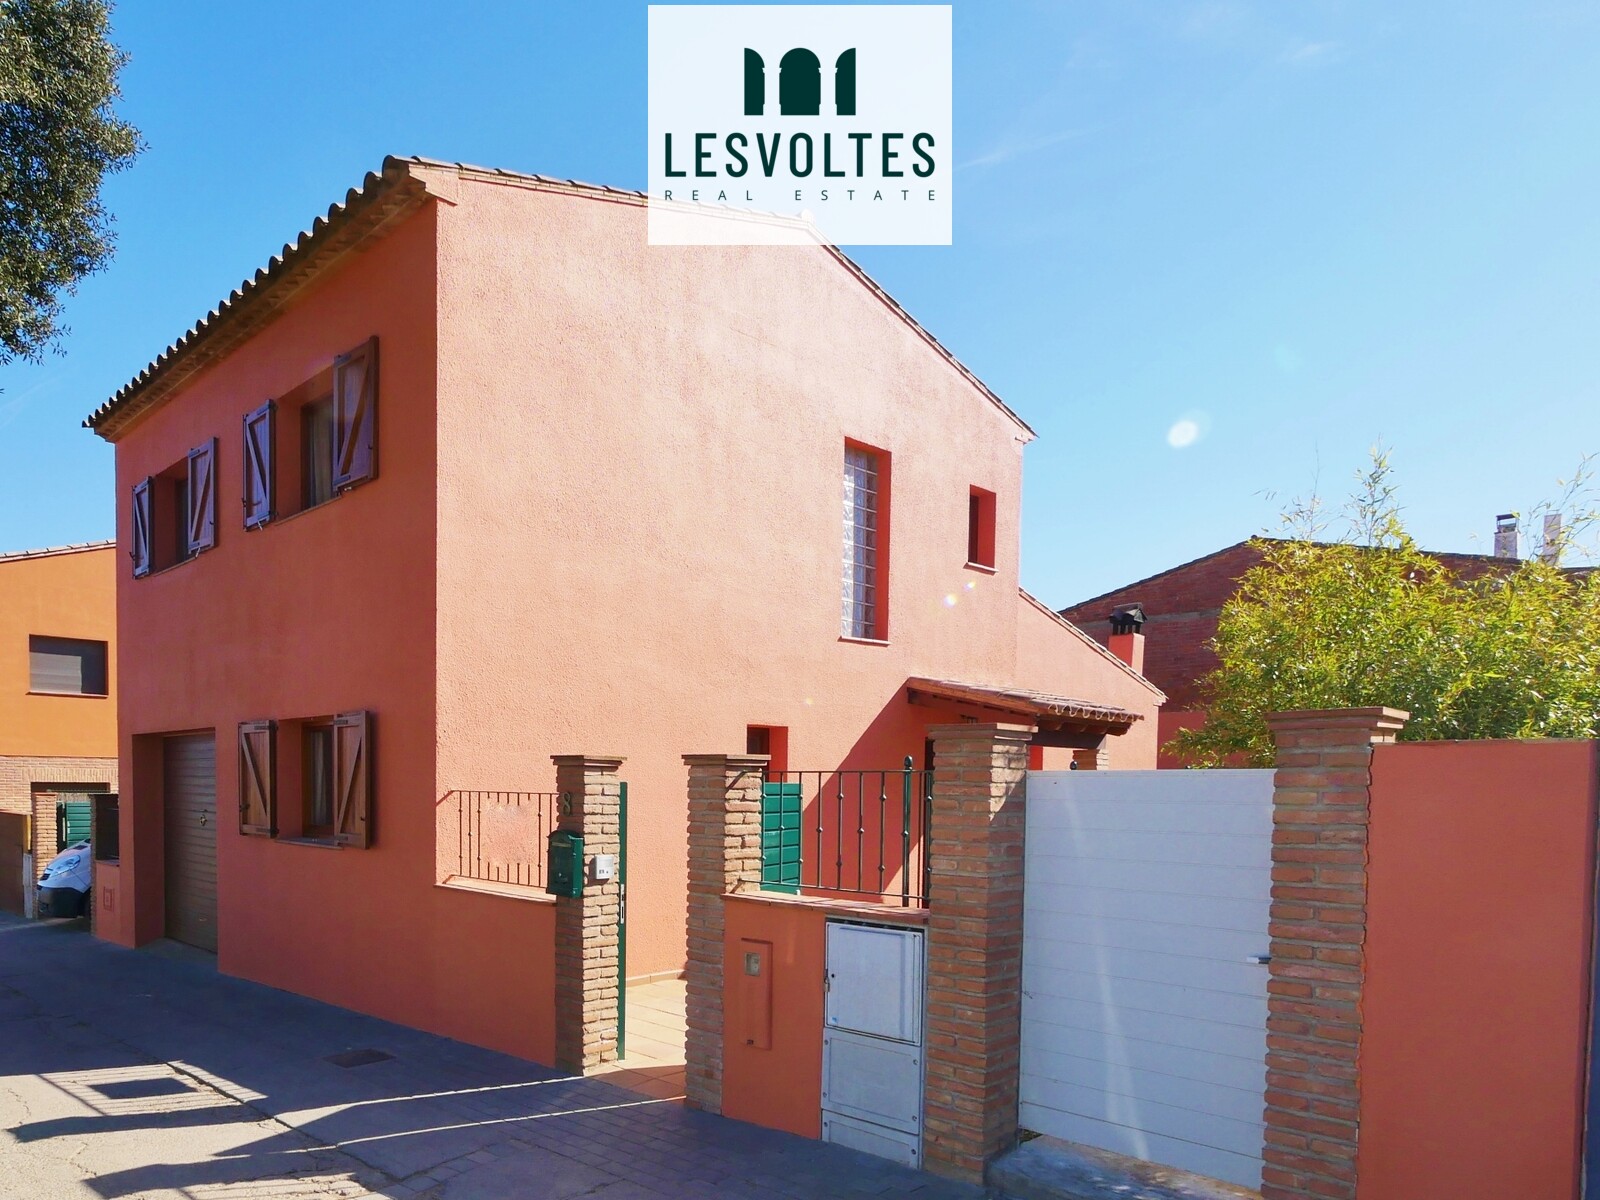 Detached house with garden and garage for sale in Llofriu. Quiet residential area. 